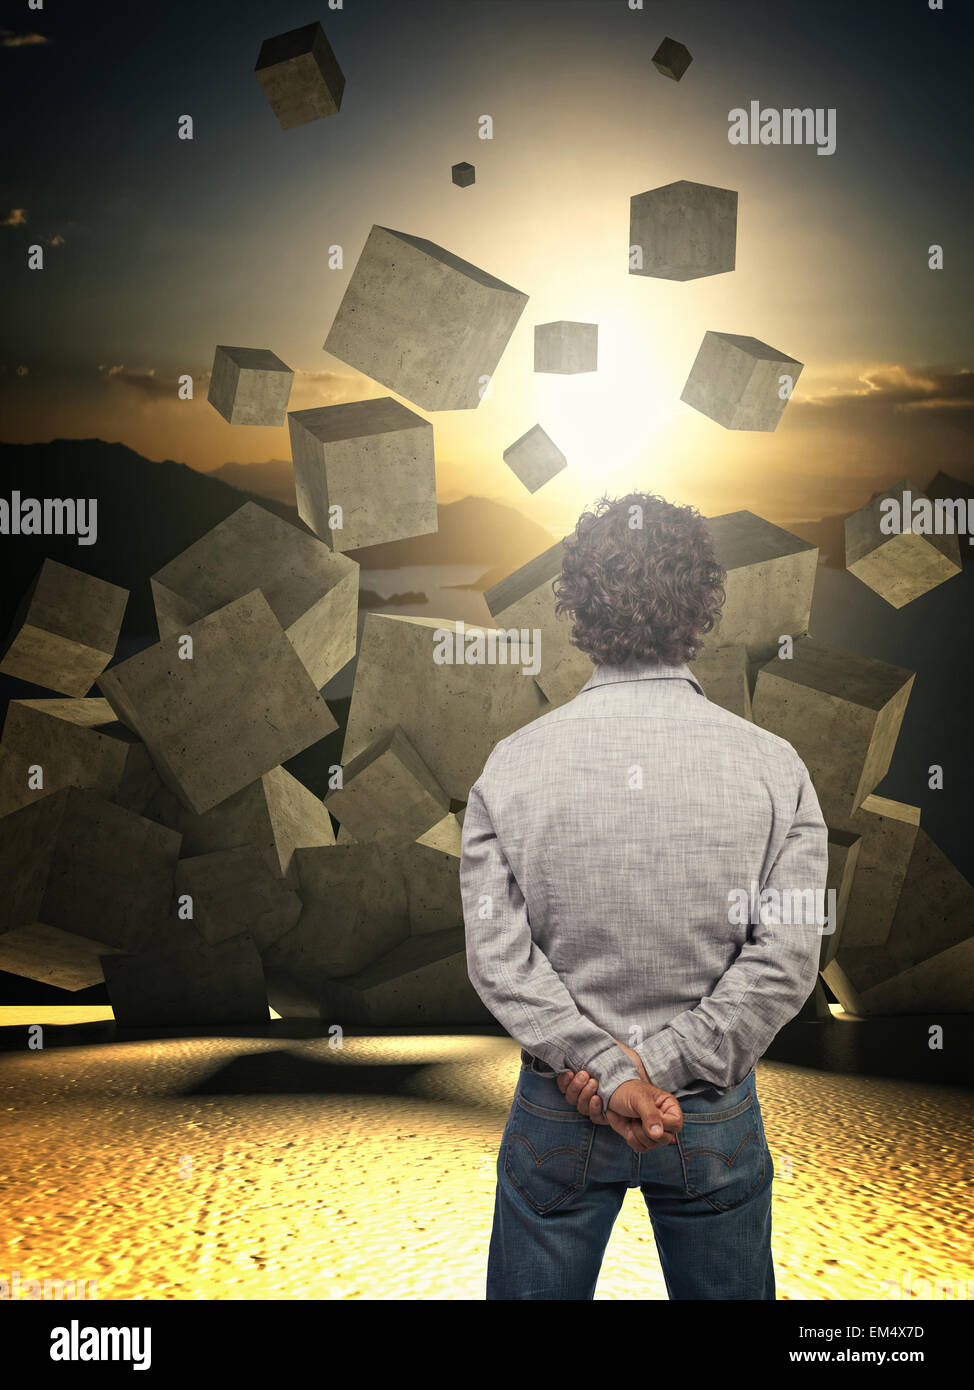 man look croncrete abstract cubes falling from the sky Stock Photo